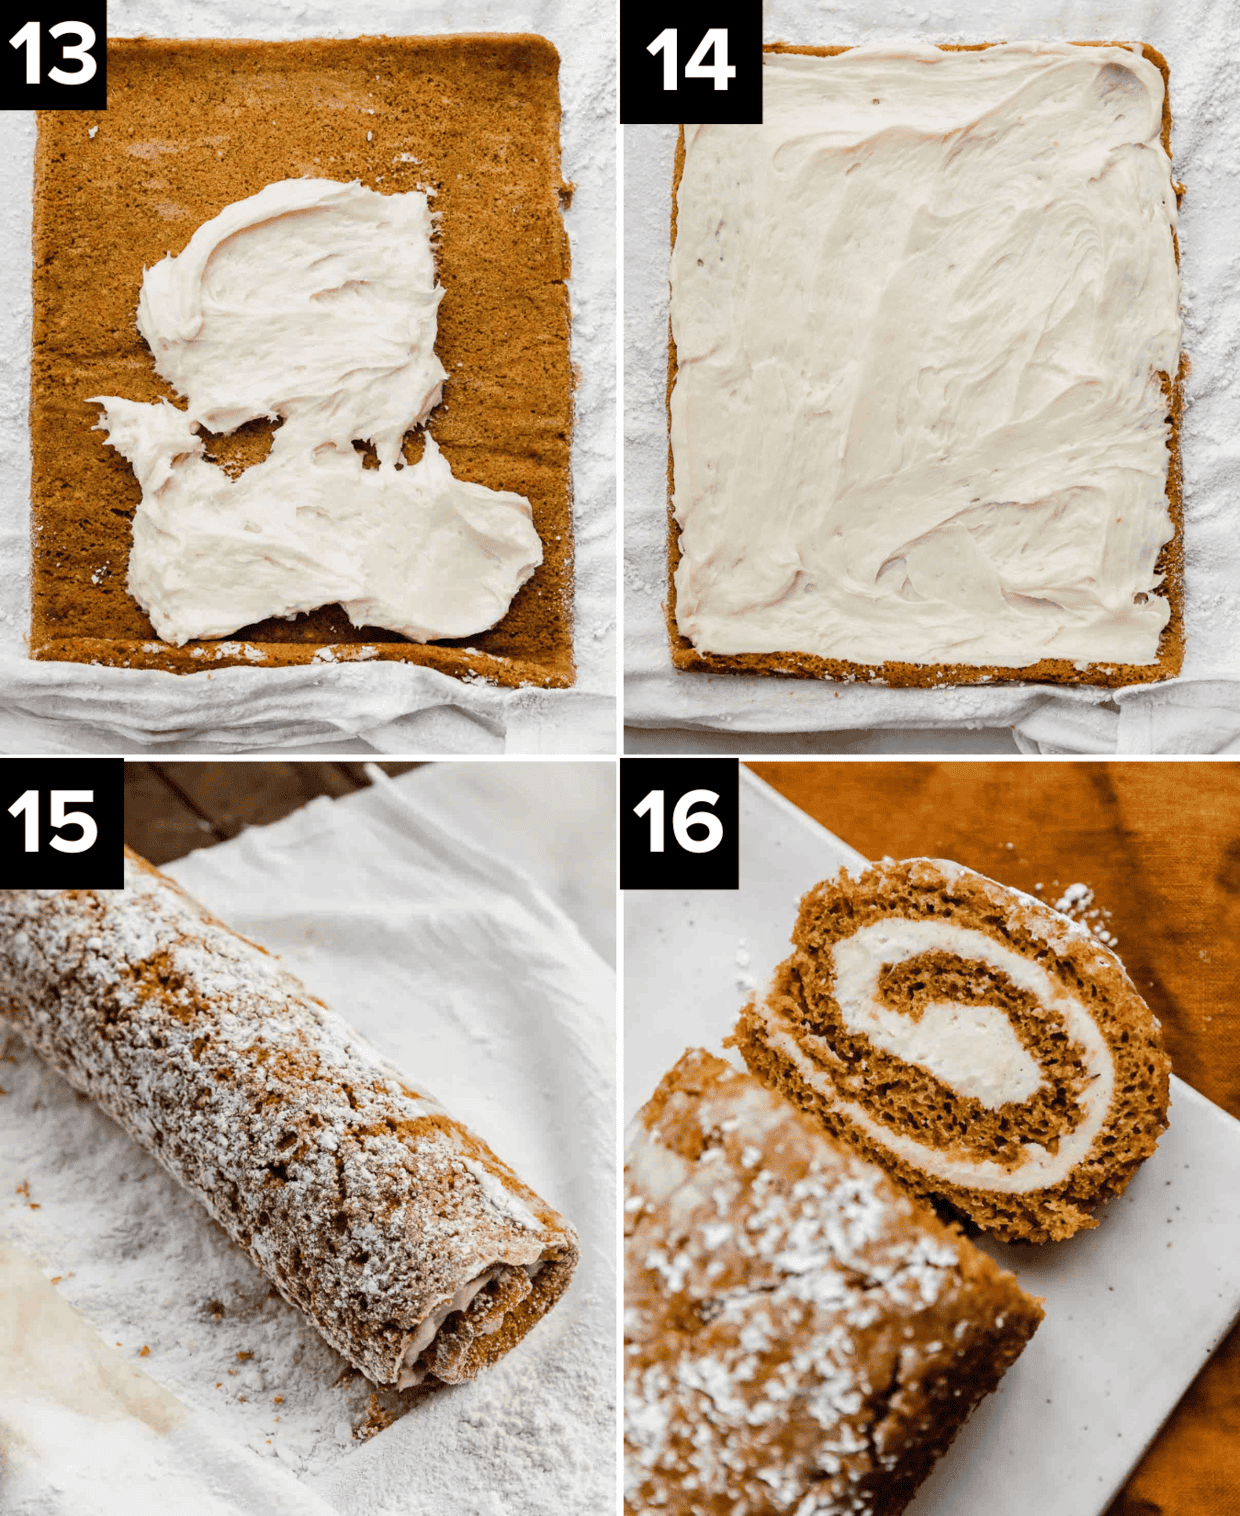 Four images showing how to make Libby's Pumpkin Roll with cream cheese filling spread over the cake, then rolled up and dusted with powdered sugar.